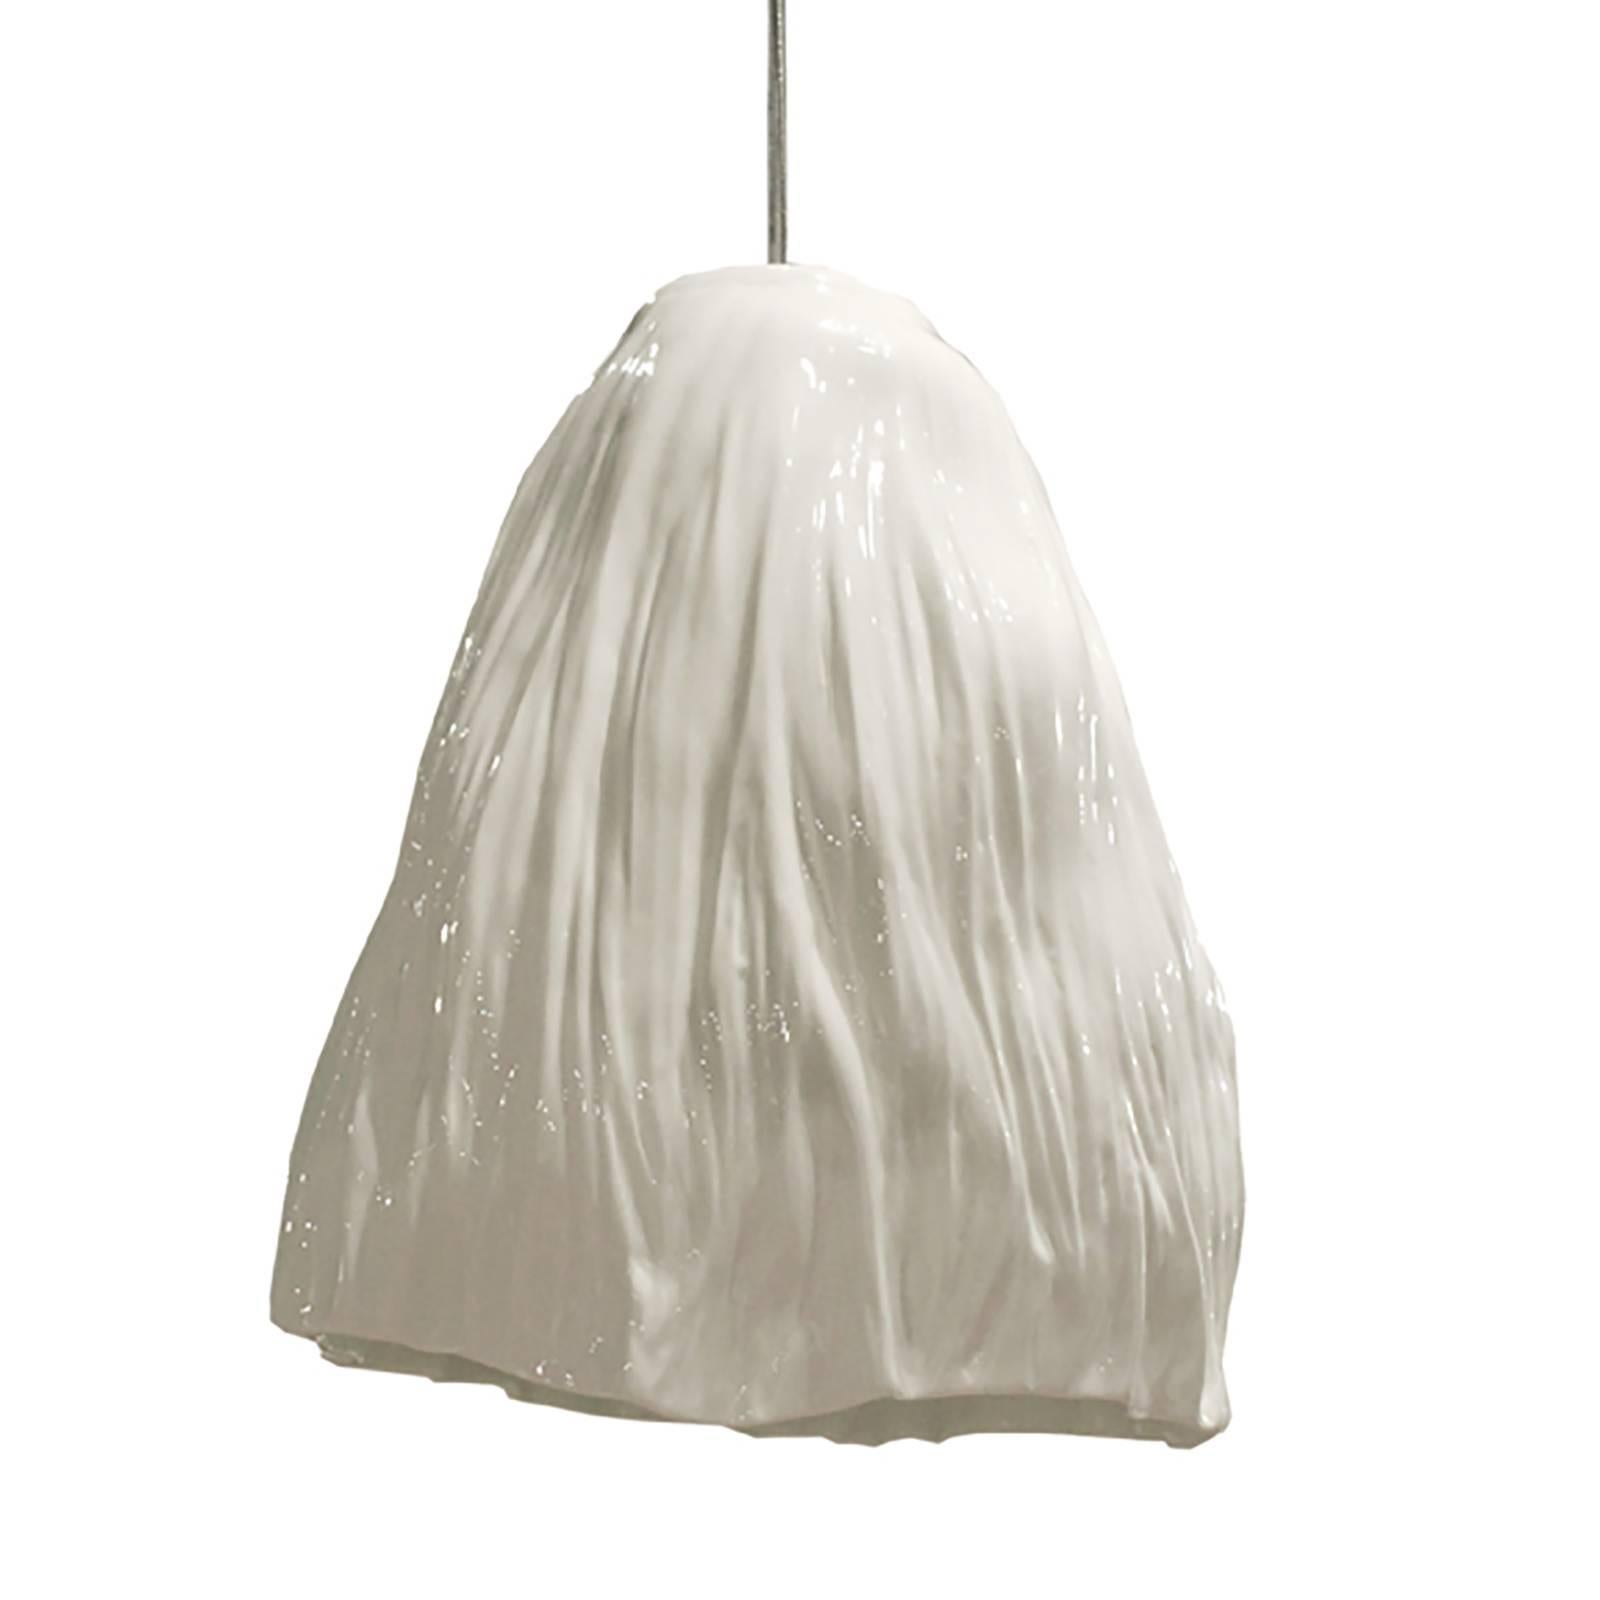 Xie Dong, a Beijing-based ceramist, works conceptually to capture moments of time in porcelain. Each SHUI pendant gracefully mimics draping fabric while maintaining the highest level of craftsmanship. The art of creating pure white porcelain, thin